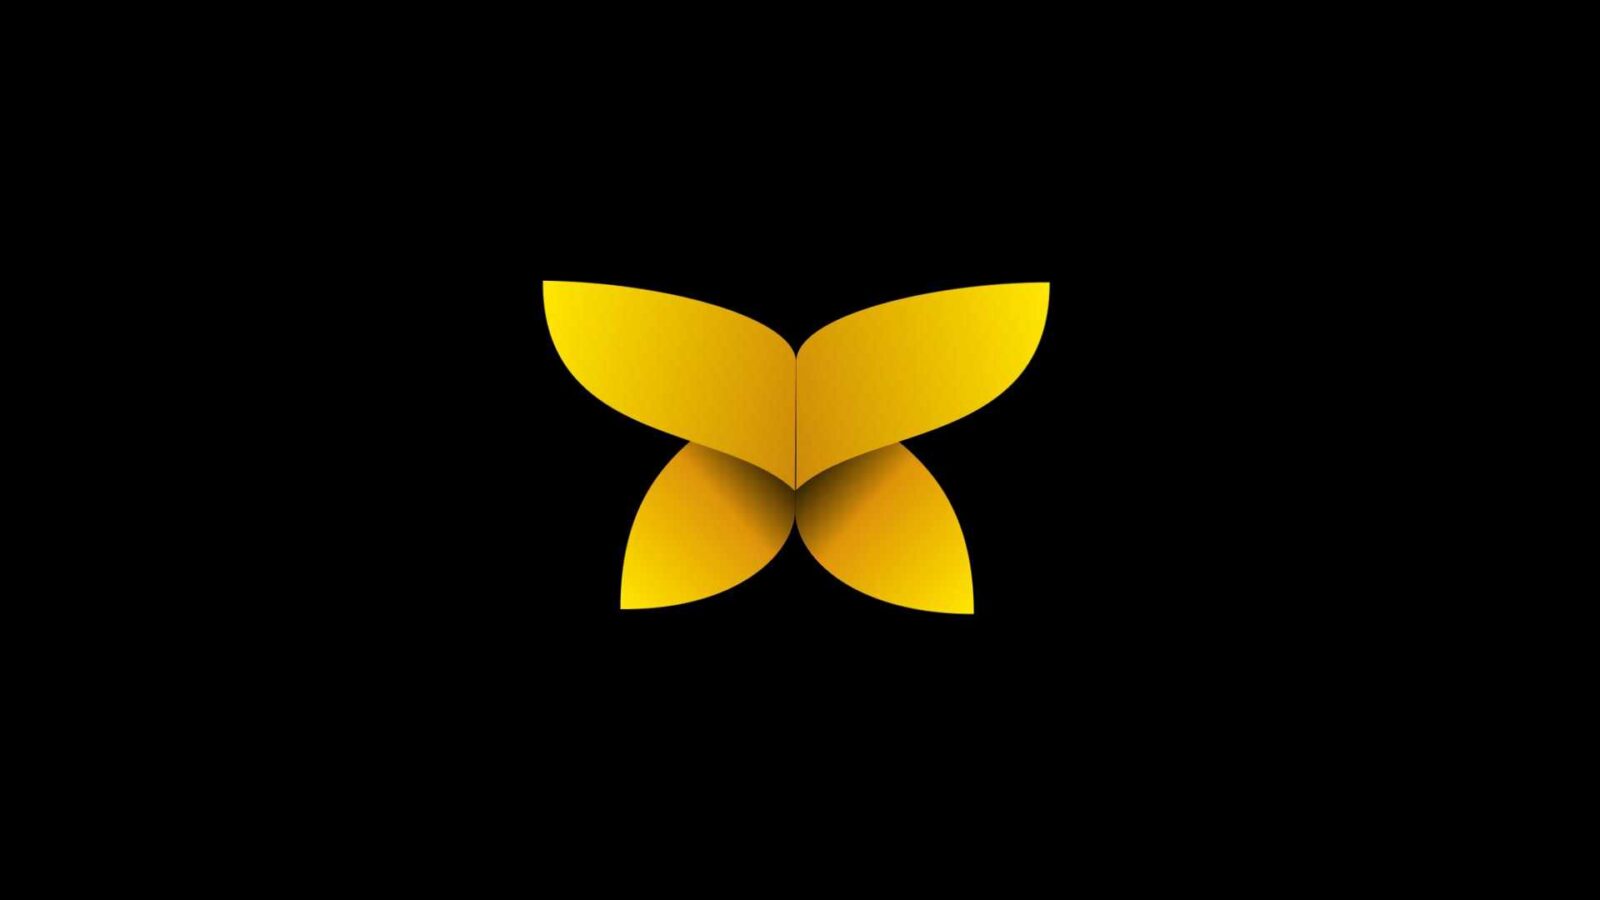 LiveWallpapers4Free.com | Yellow Butterfly Abstract Shapes - Free Live Wallpaper